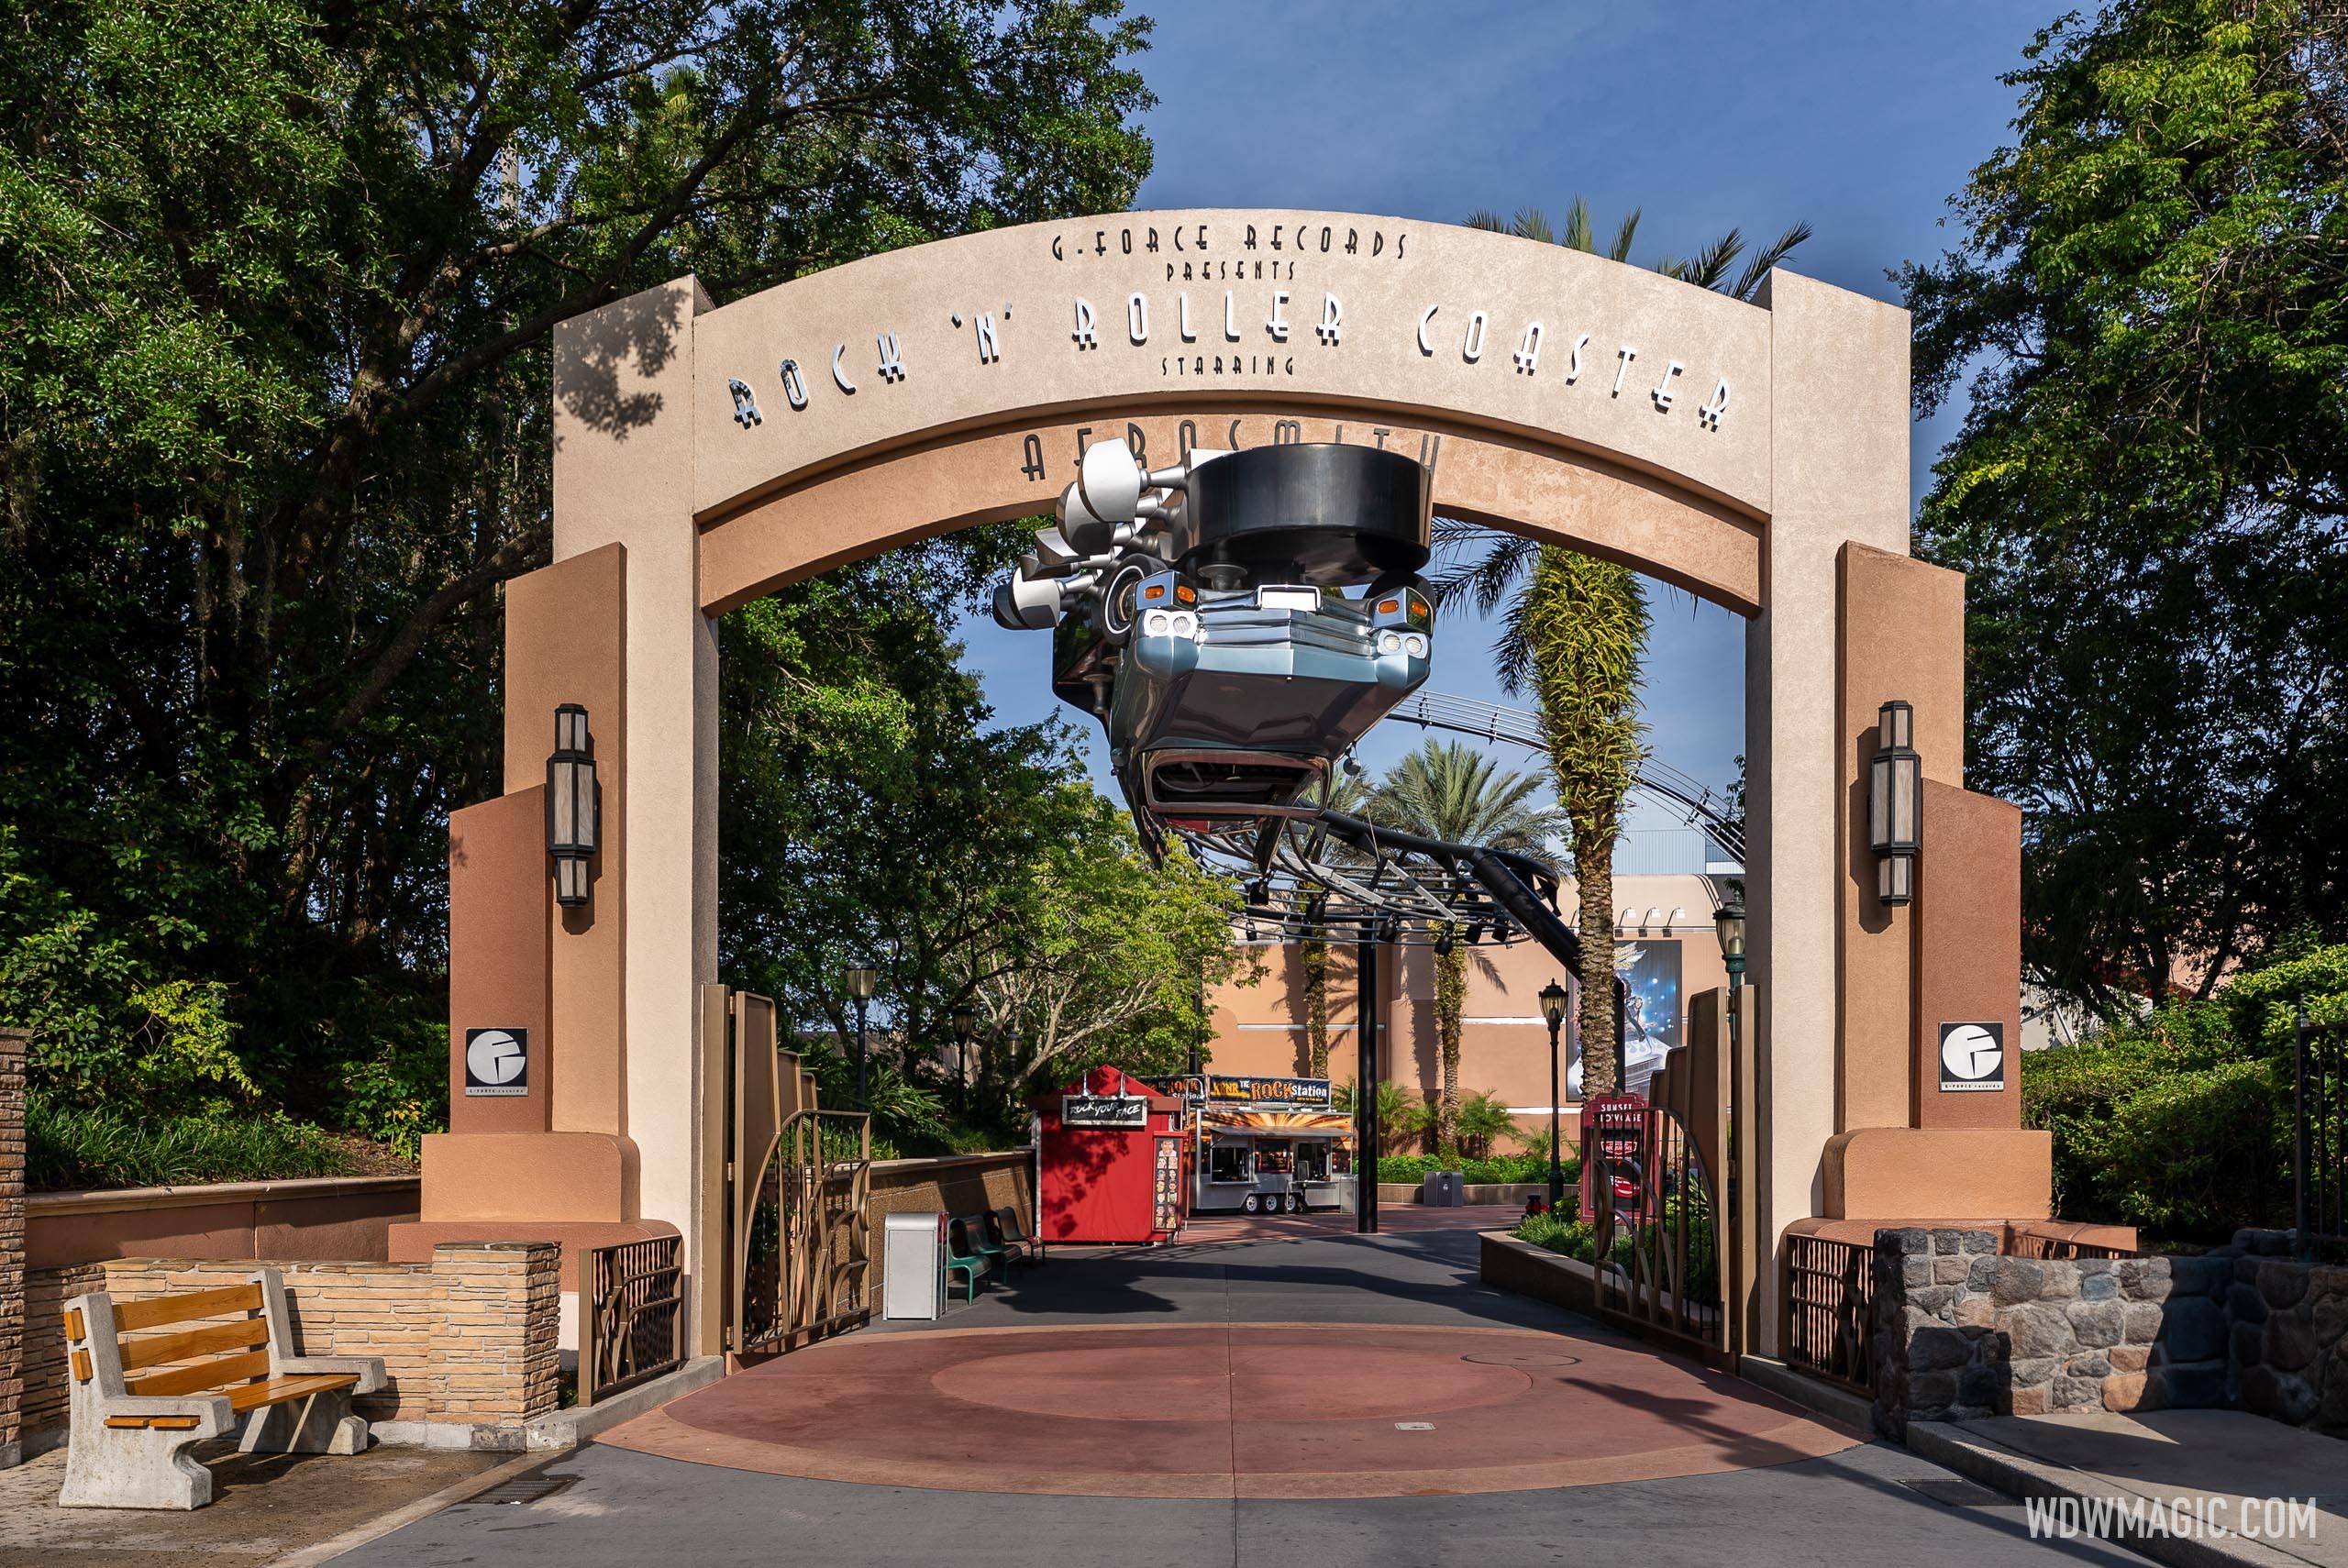 Aerosmith Attraction Re-Opens At Disney's Hollywood Studios